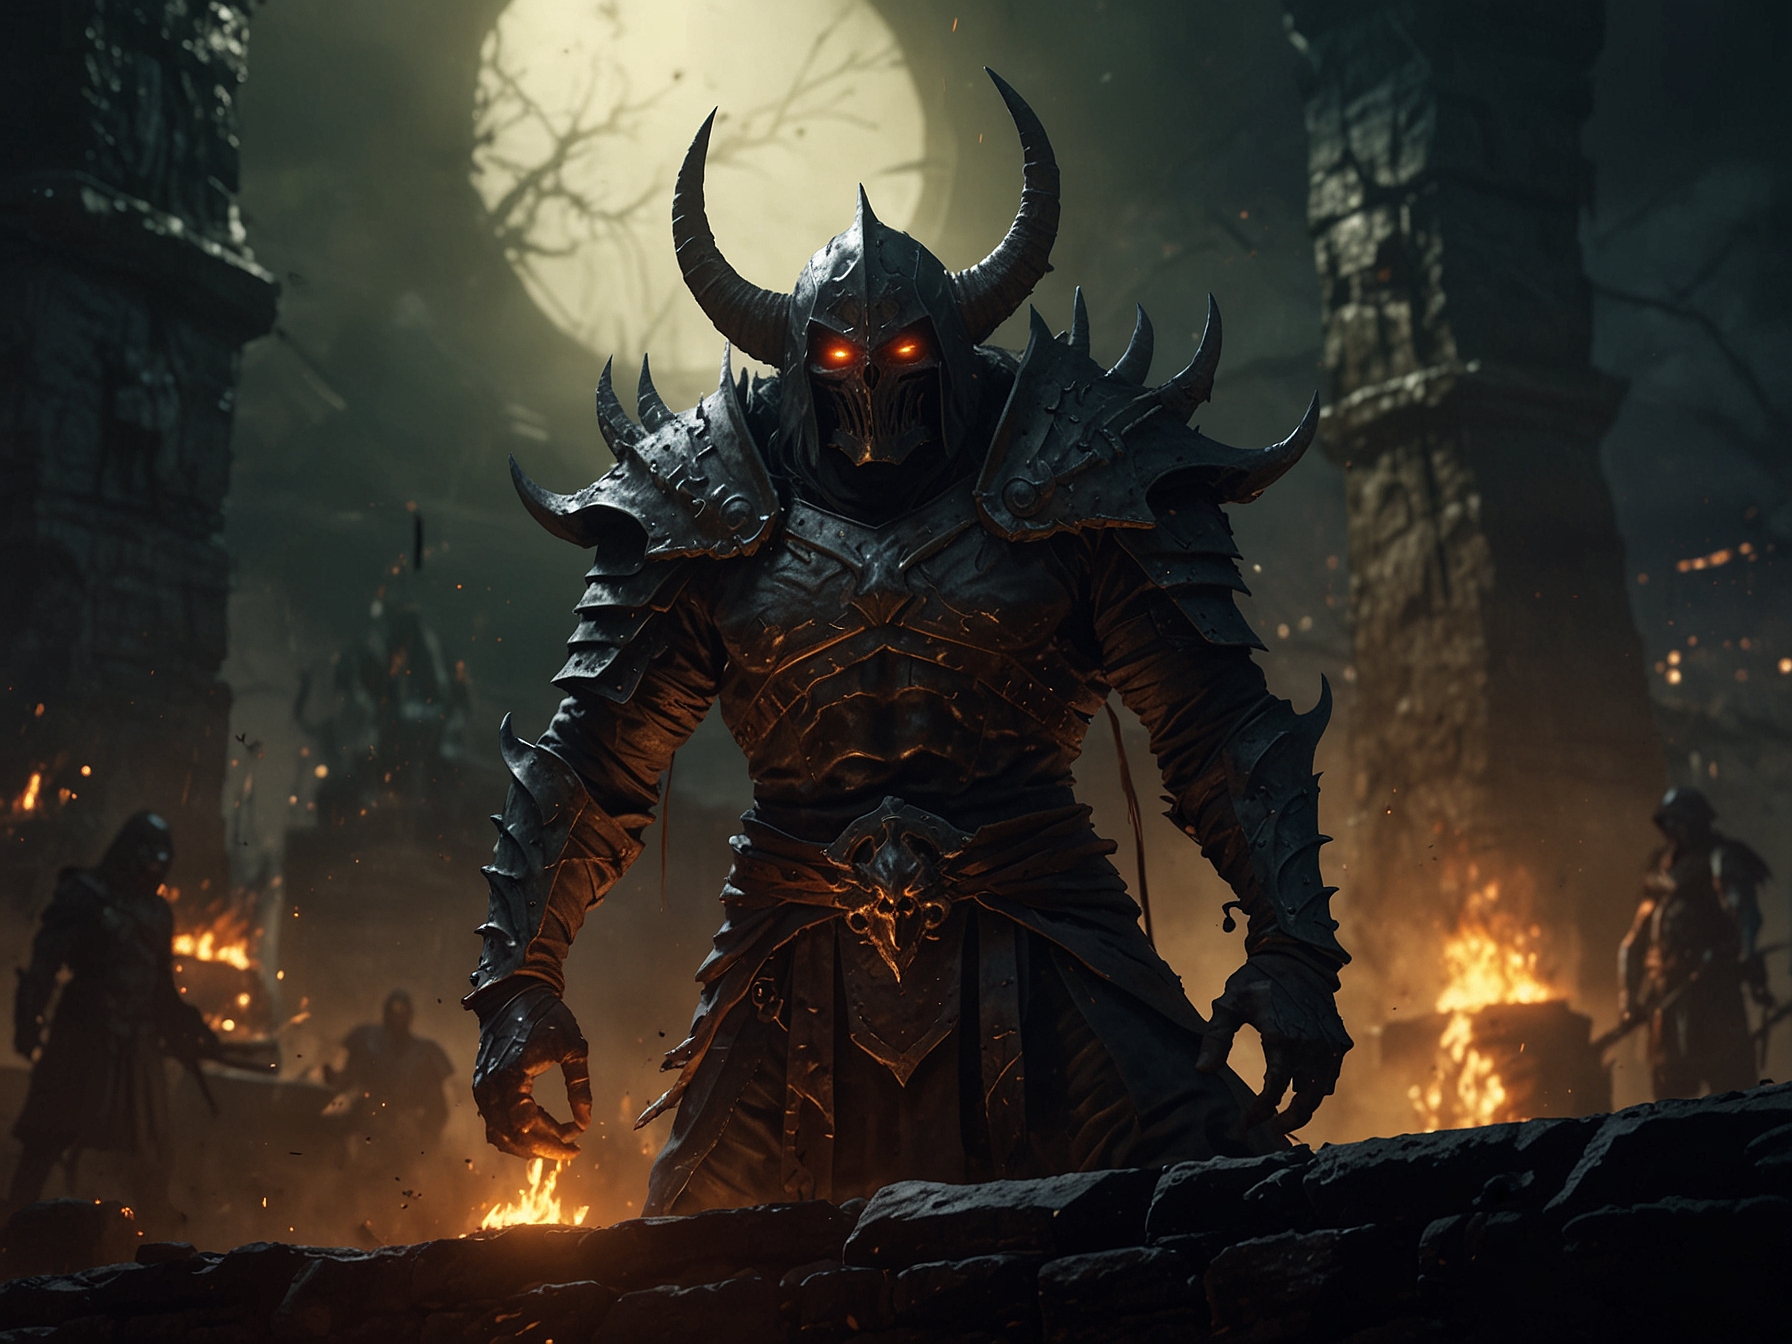 An in-game screen capture of Elden Ring showing the boss Mohg, the Omen, in his arena. The image highlights the menacing design of Mohg and the challenging environment where players must battle him.